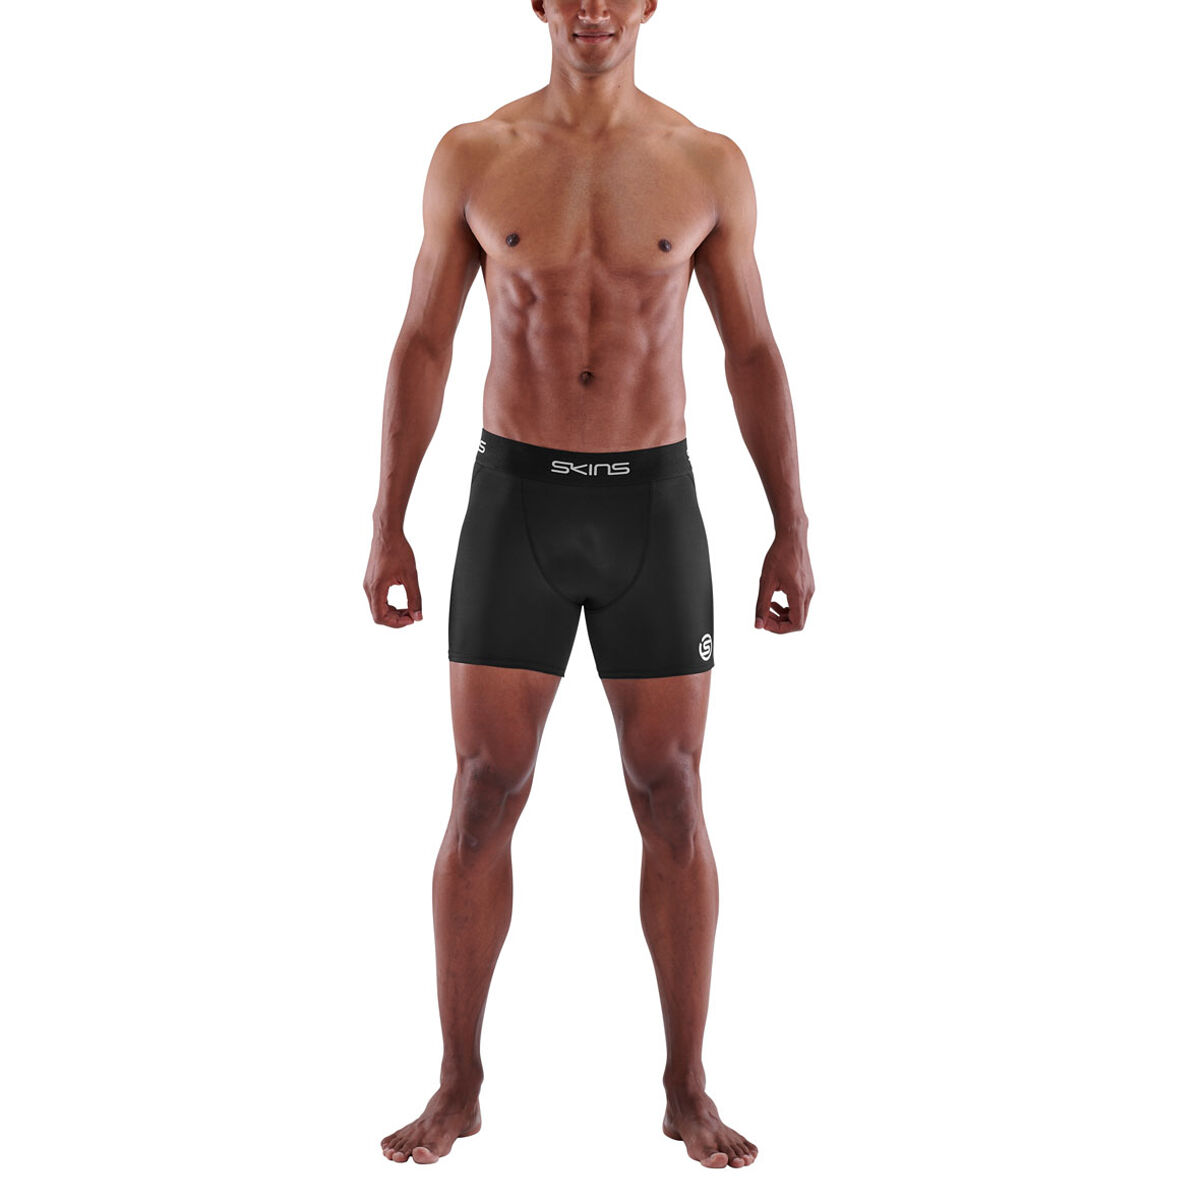 Iconic Compression Shorts in Red – Rebel Athletic